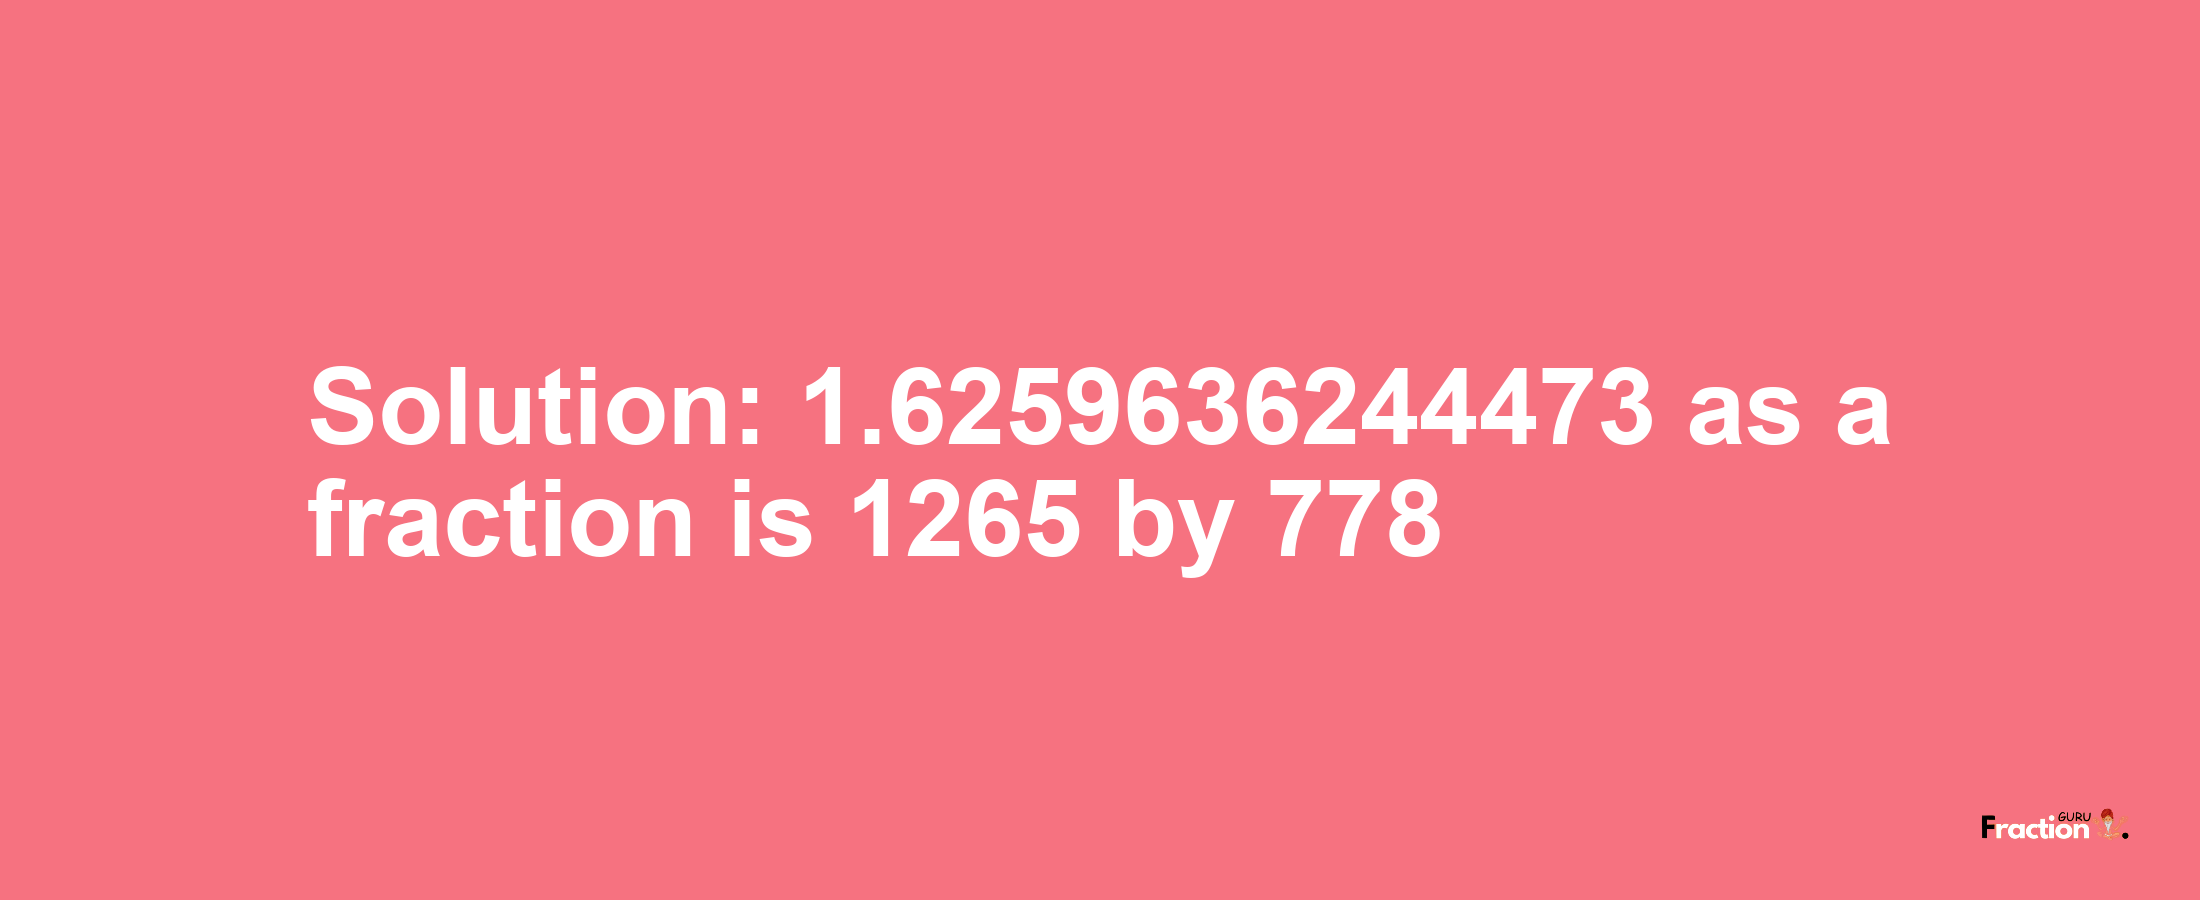 Solution:1.6259636244473 as a fraction is 1265/778